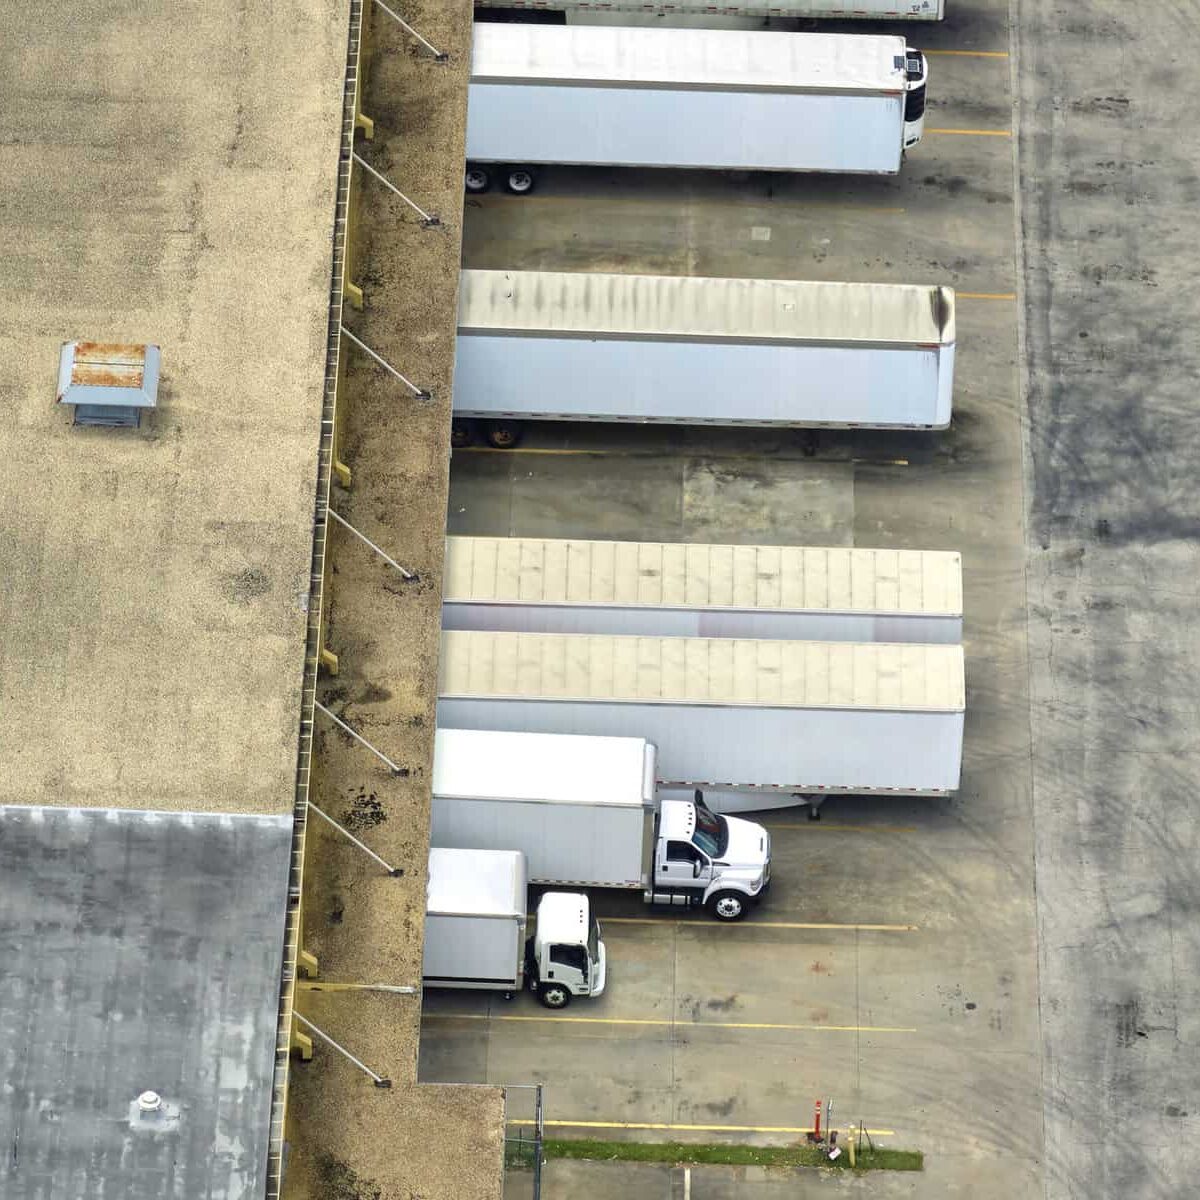 Aerial view of large commercial distribution center with many trucks unloading and uploading retail products for further shipment. Global economy concept.